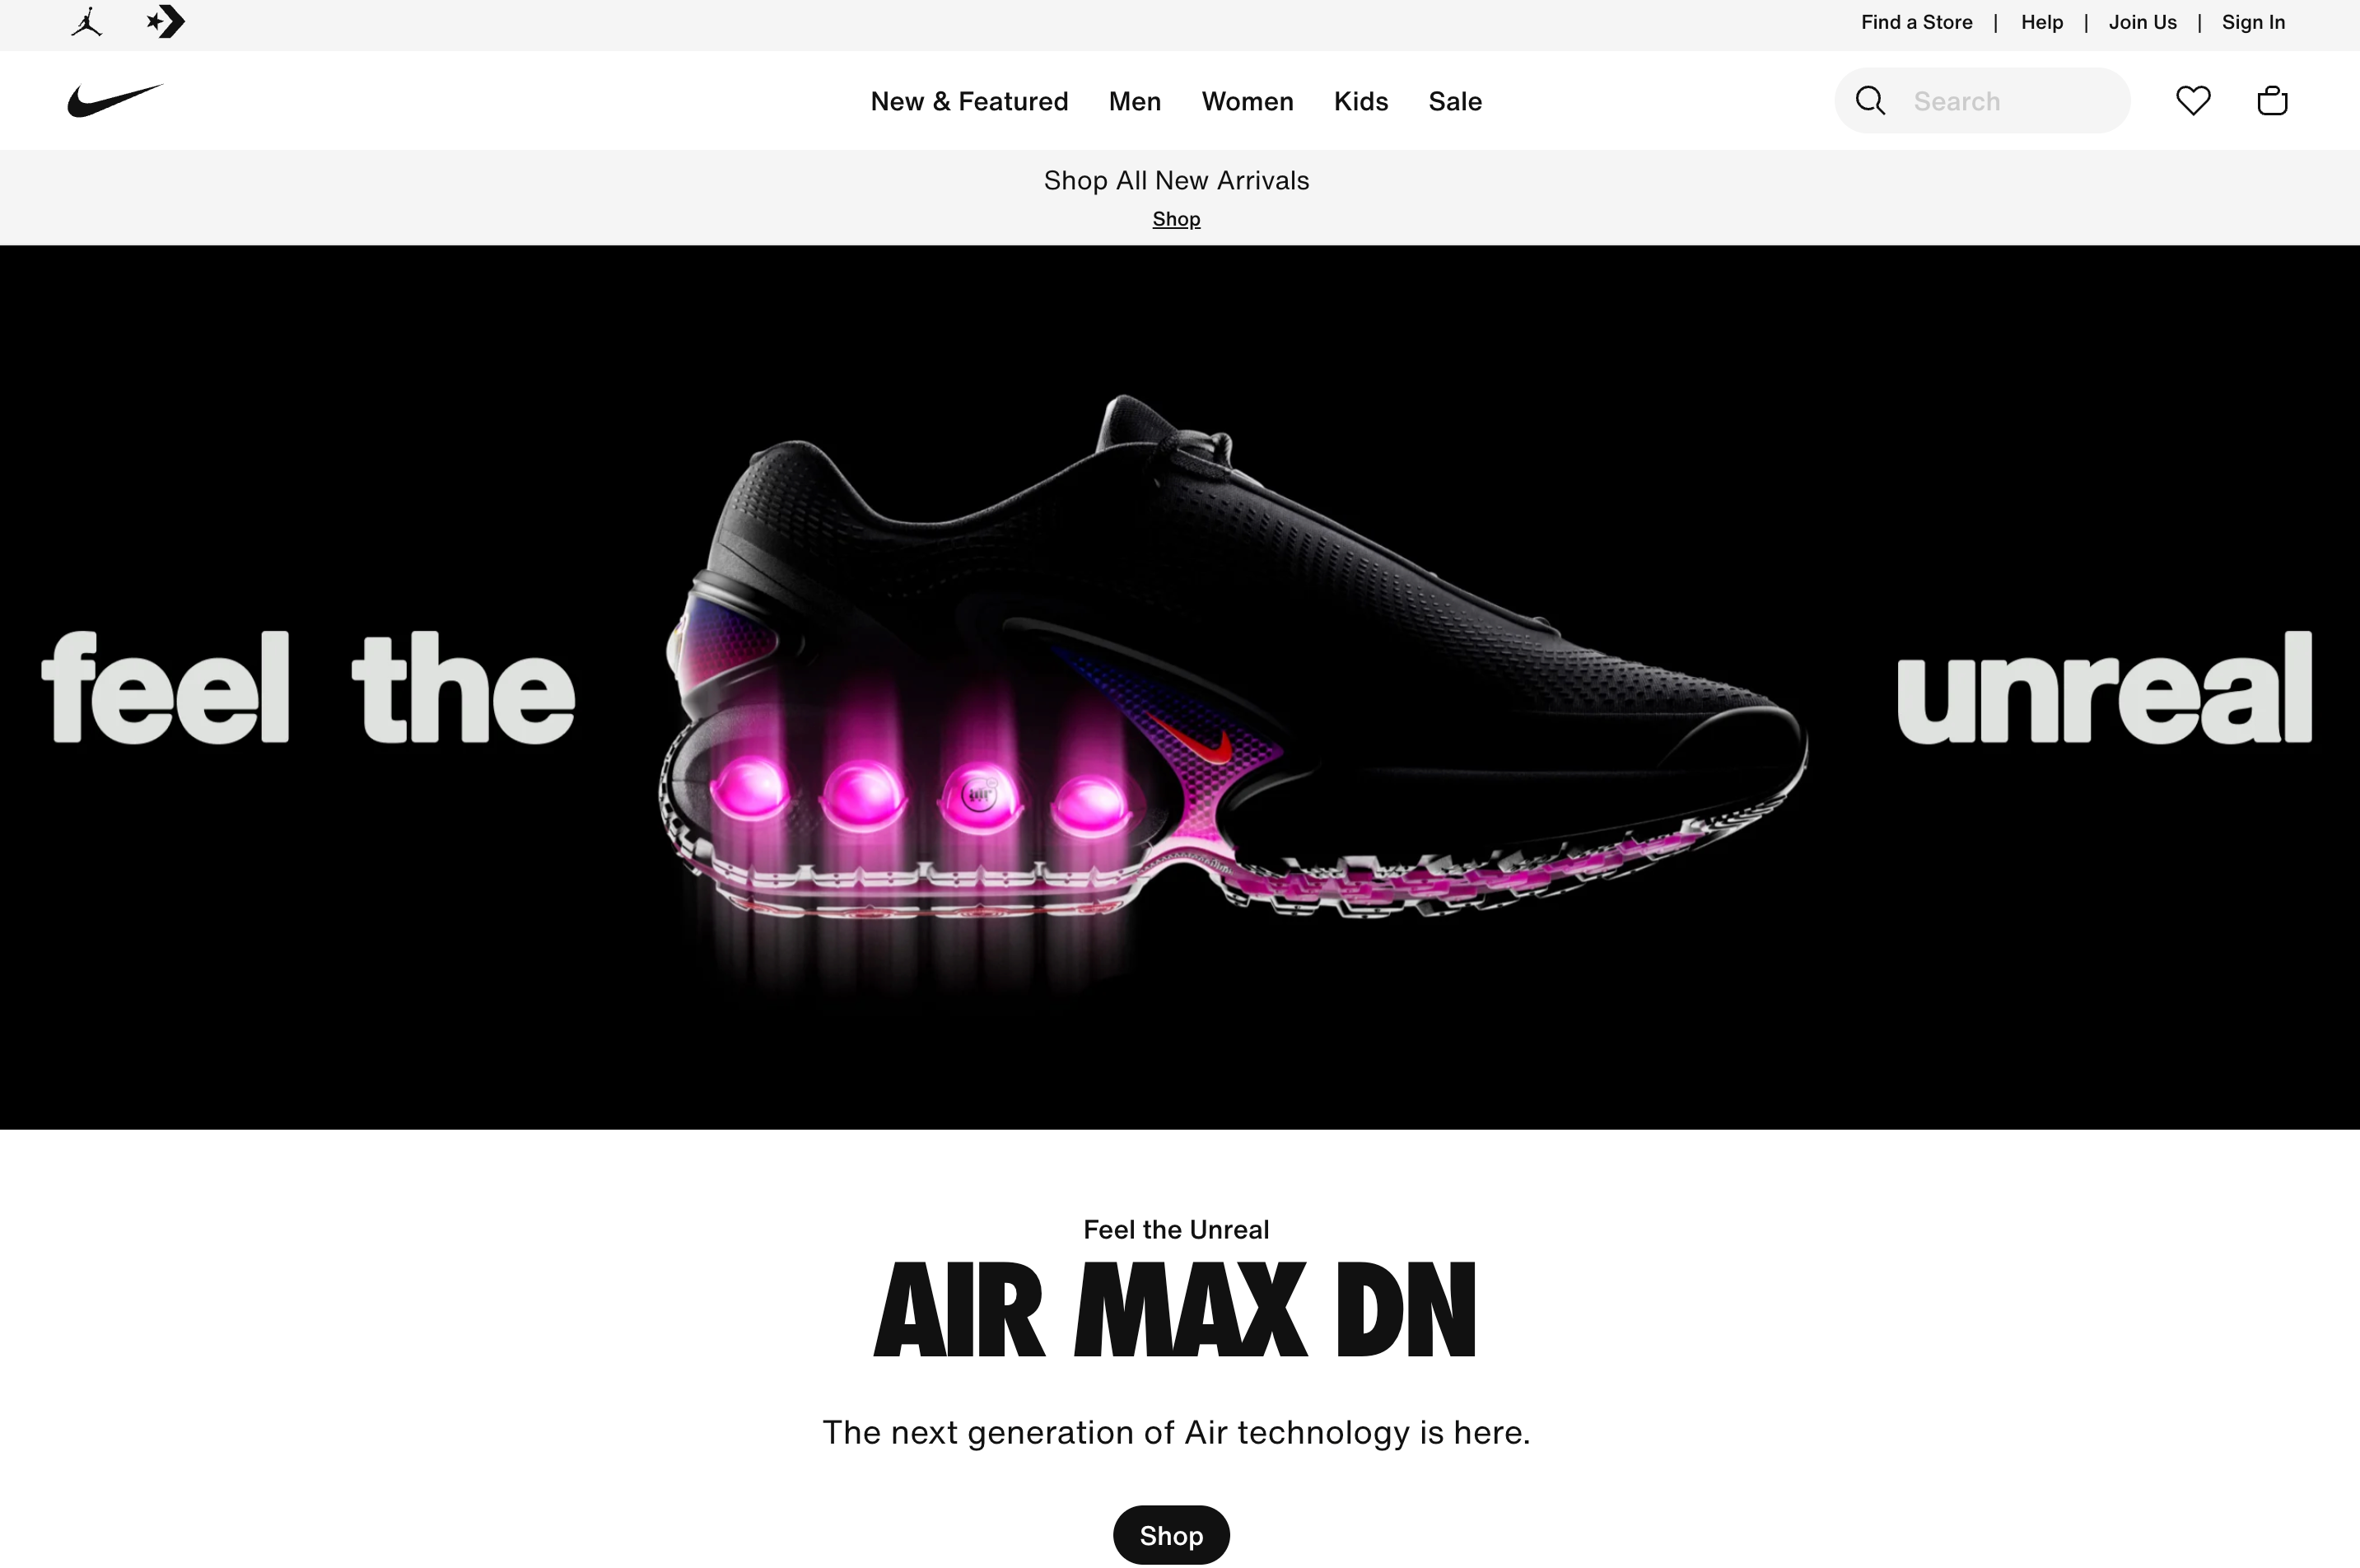 Nike homepage with large image of air max dn shoe